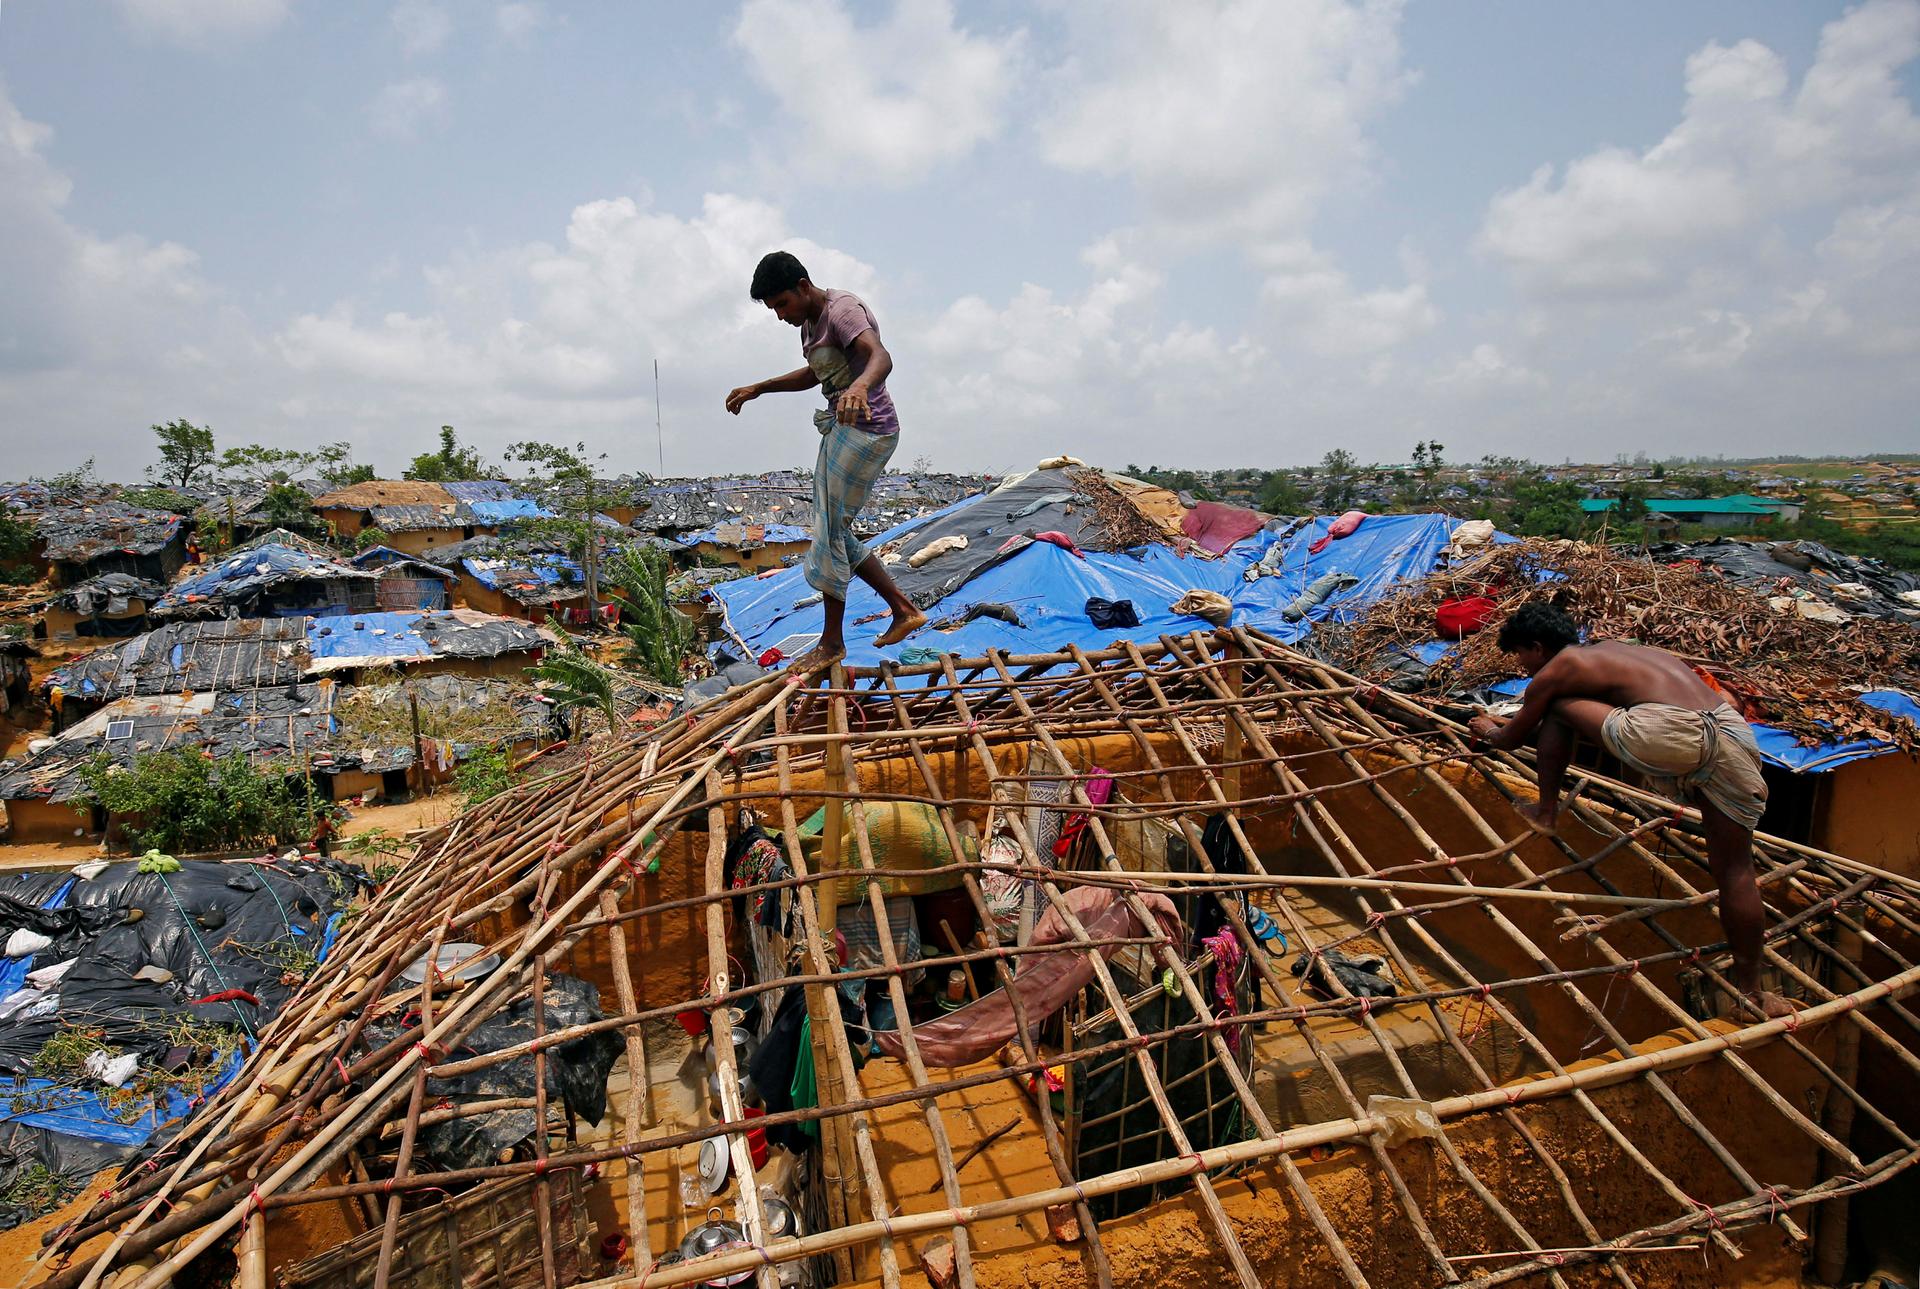 Rohingya refugees rebuild their home, which was destroyed by Cyclone Mora, at the Kutupalong makeshift refugee camp in Cox's Bazar, Bangladesh, June 1, 2017.